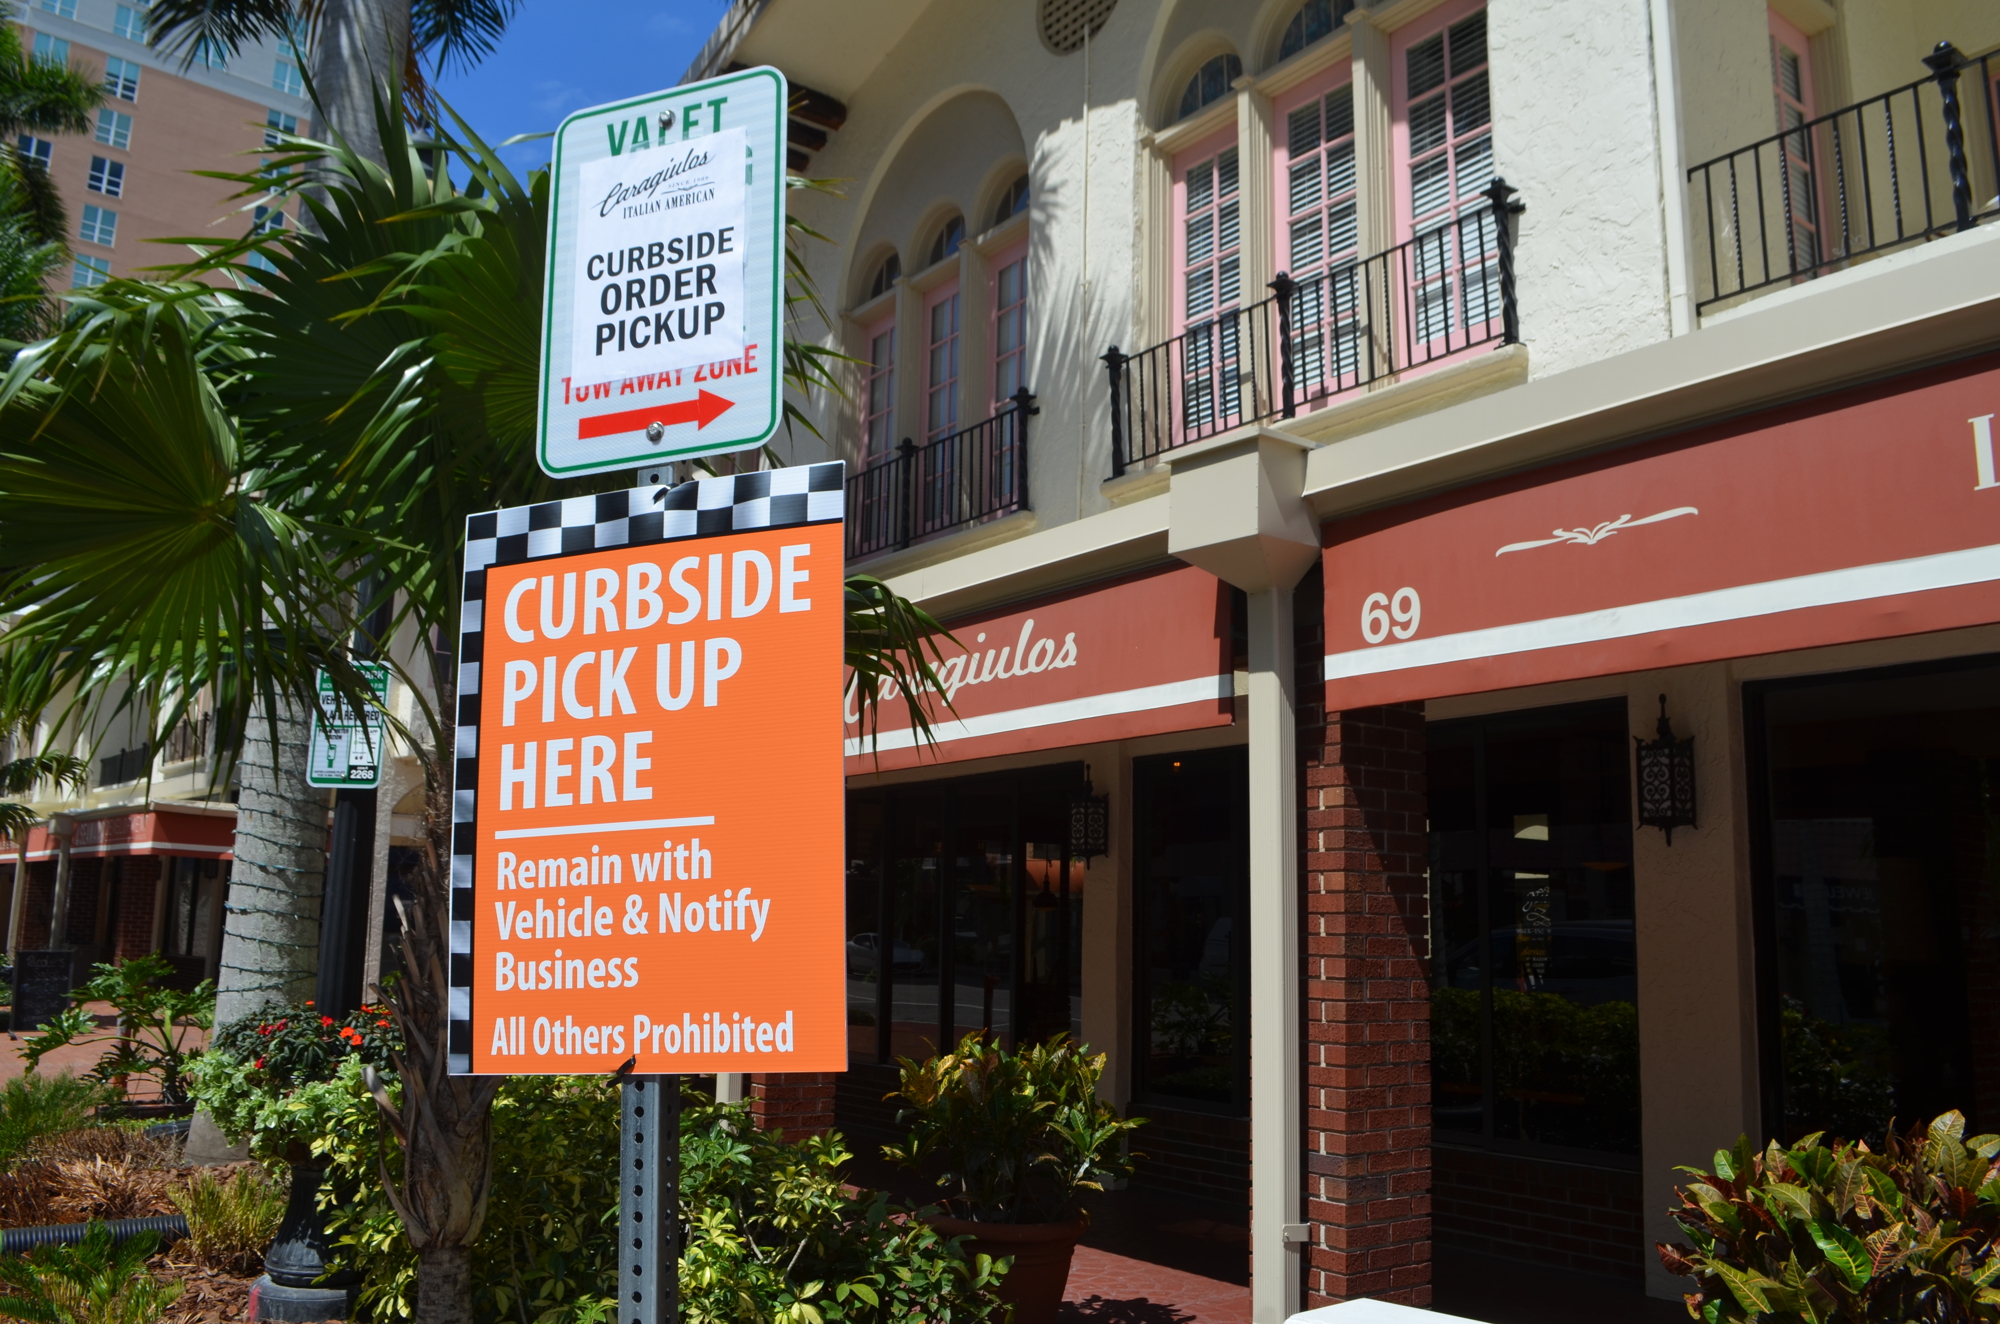 The city installed signs for designated pickup parking spots near downtown restaurants this week.